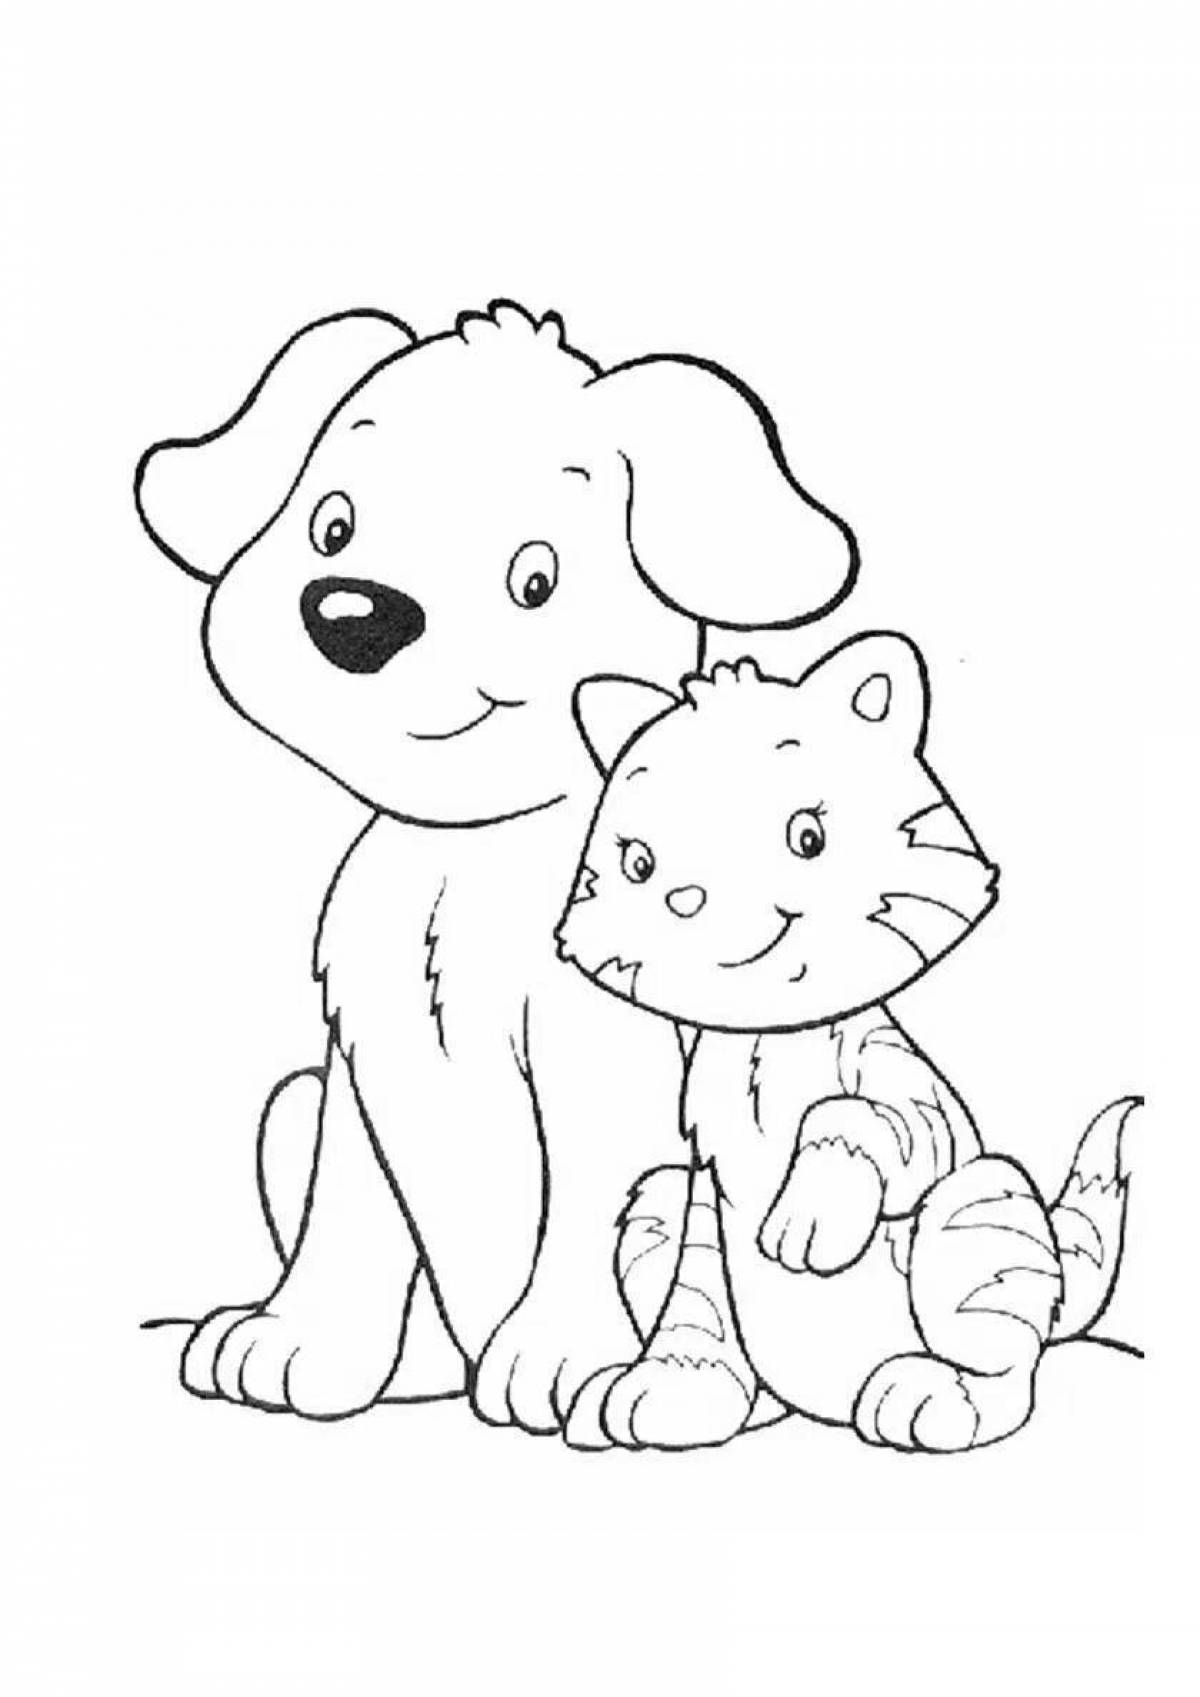 Dan kitty and dogs glowing coloring book